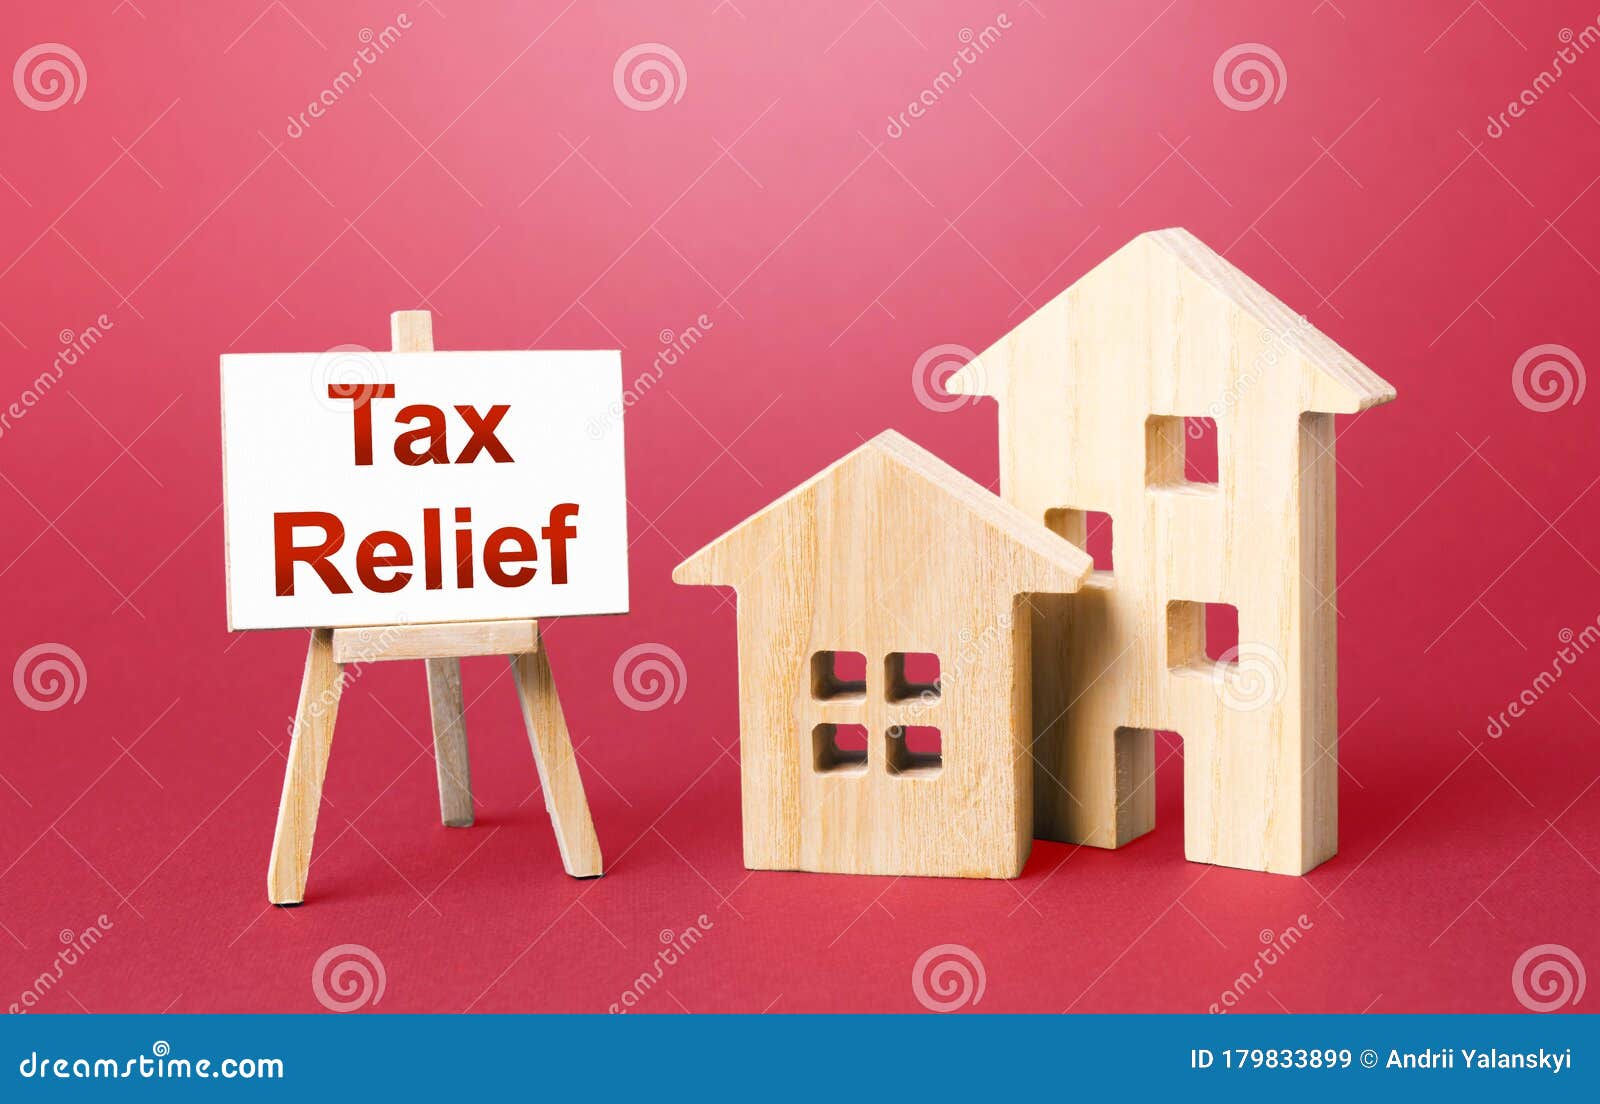 residential houses and tax relief easel. deferral payments of taxes and debts. financial flexibility. state support for a period